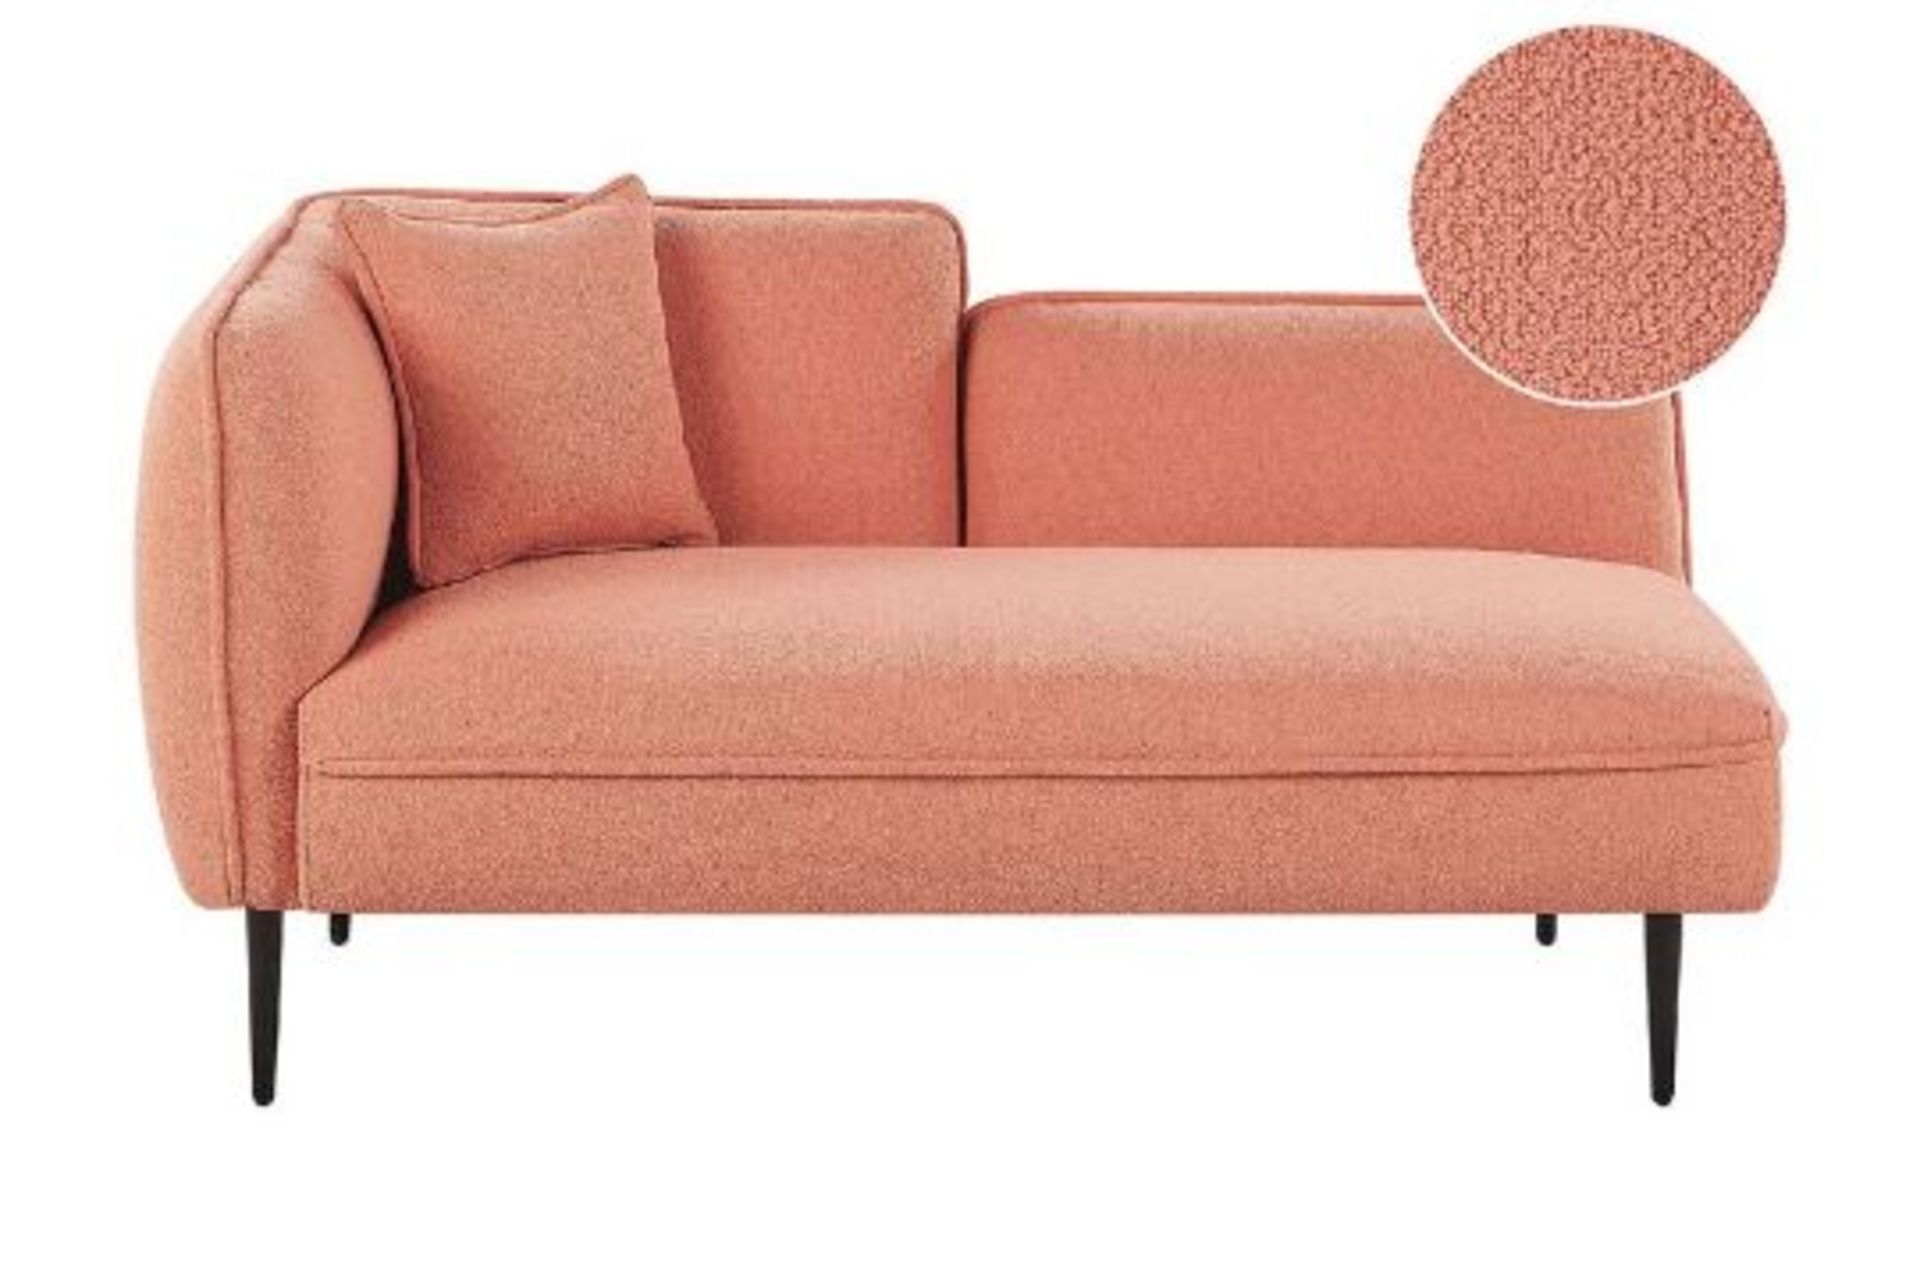 Chevannes Left Hand Boucle Chaise Lounge Peach Pink 2/12. - ER24. RRP £799.99. This elegant chaise